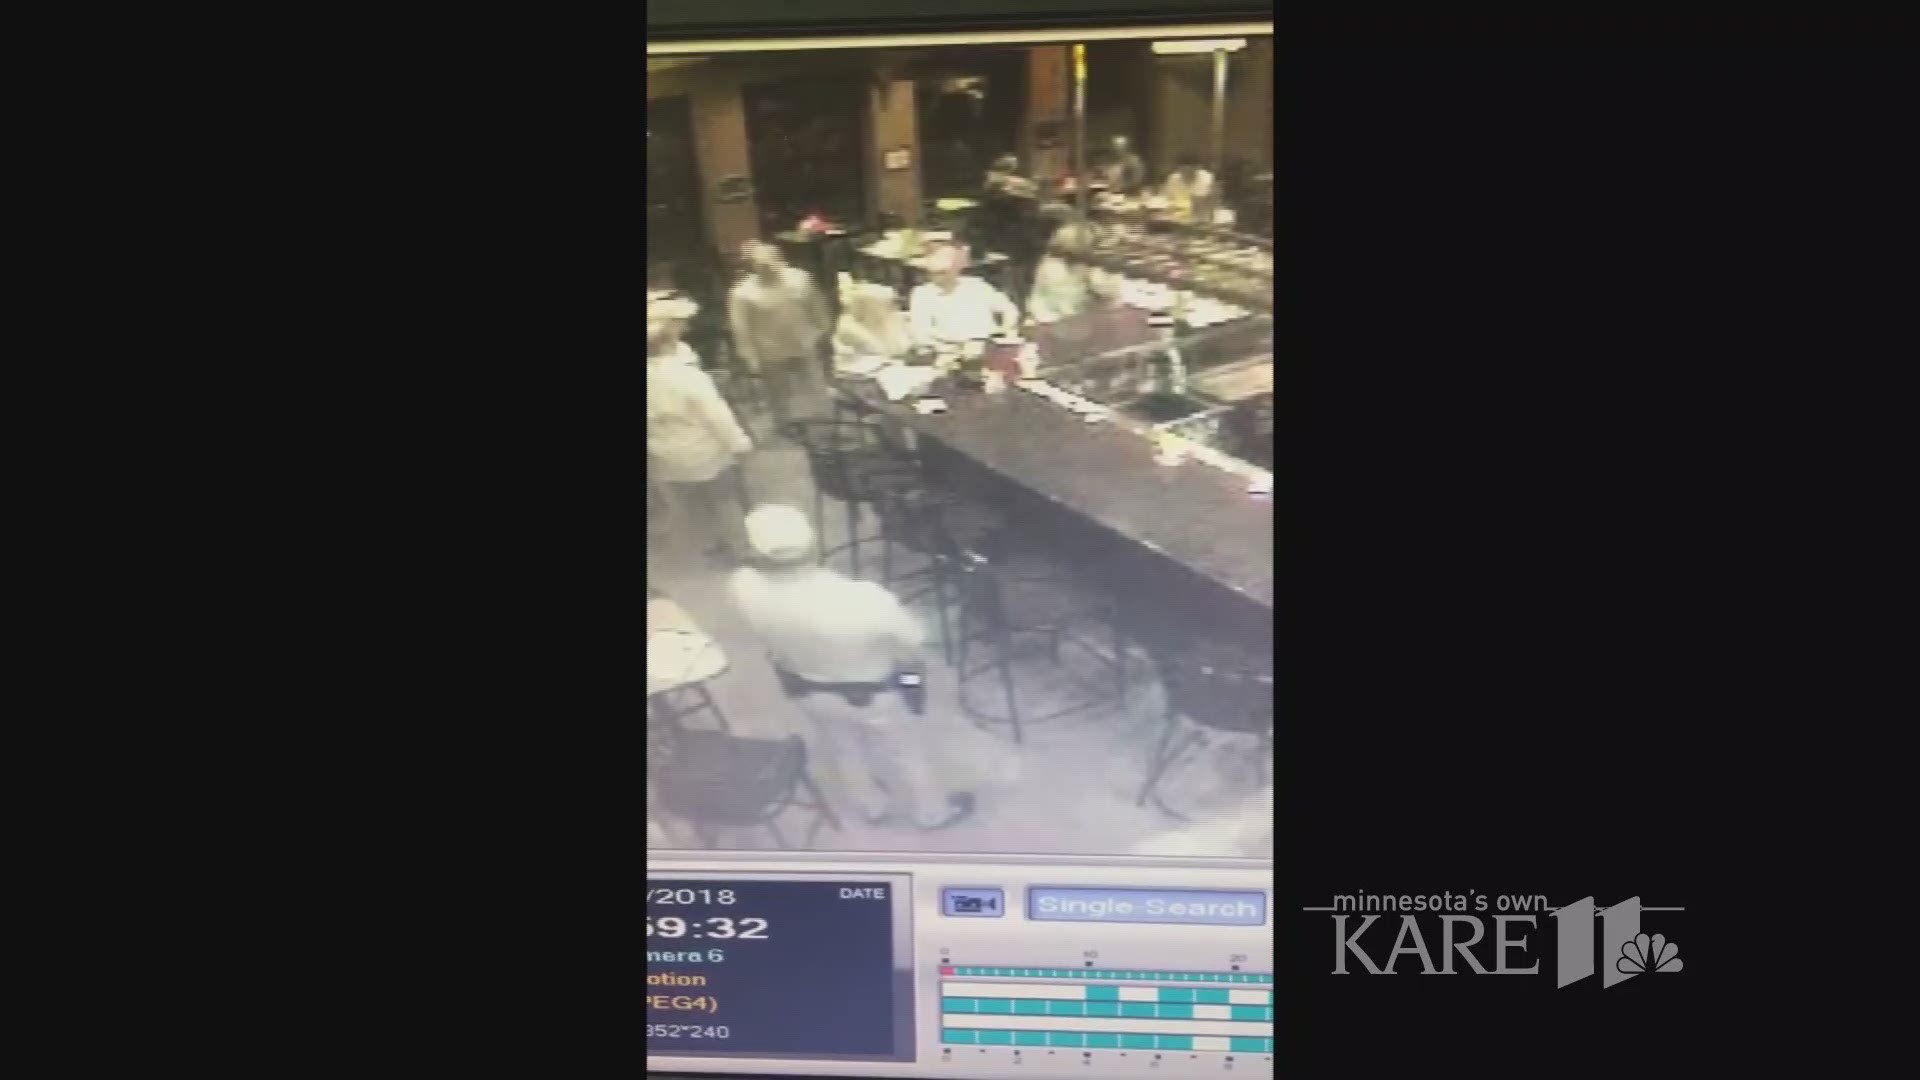 Surveillance video obtained by NBC News shows Lois Riess being arrested in a Texas restaurant. https://kare11.tv/2JrvWbU